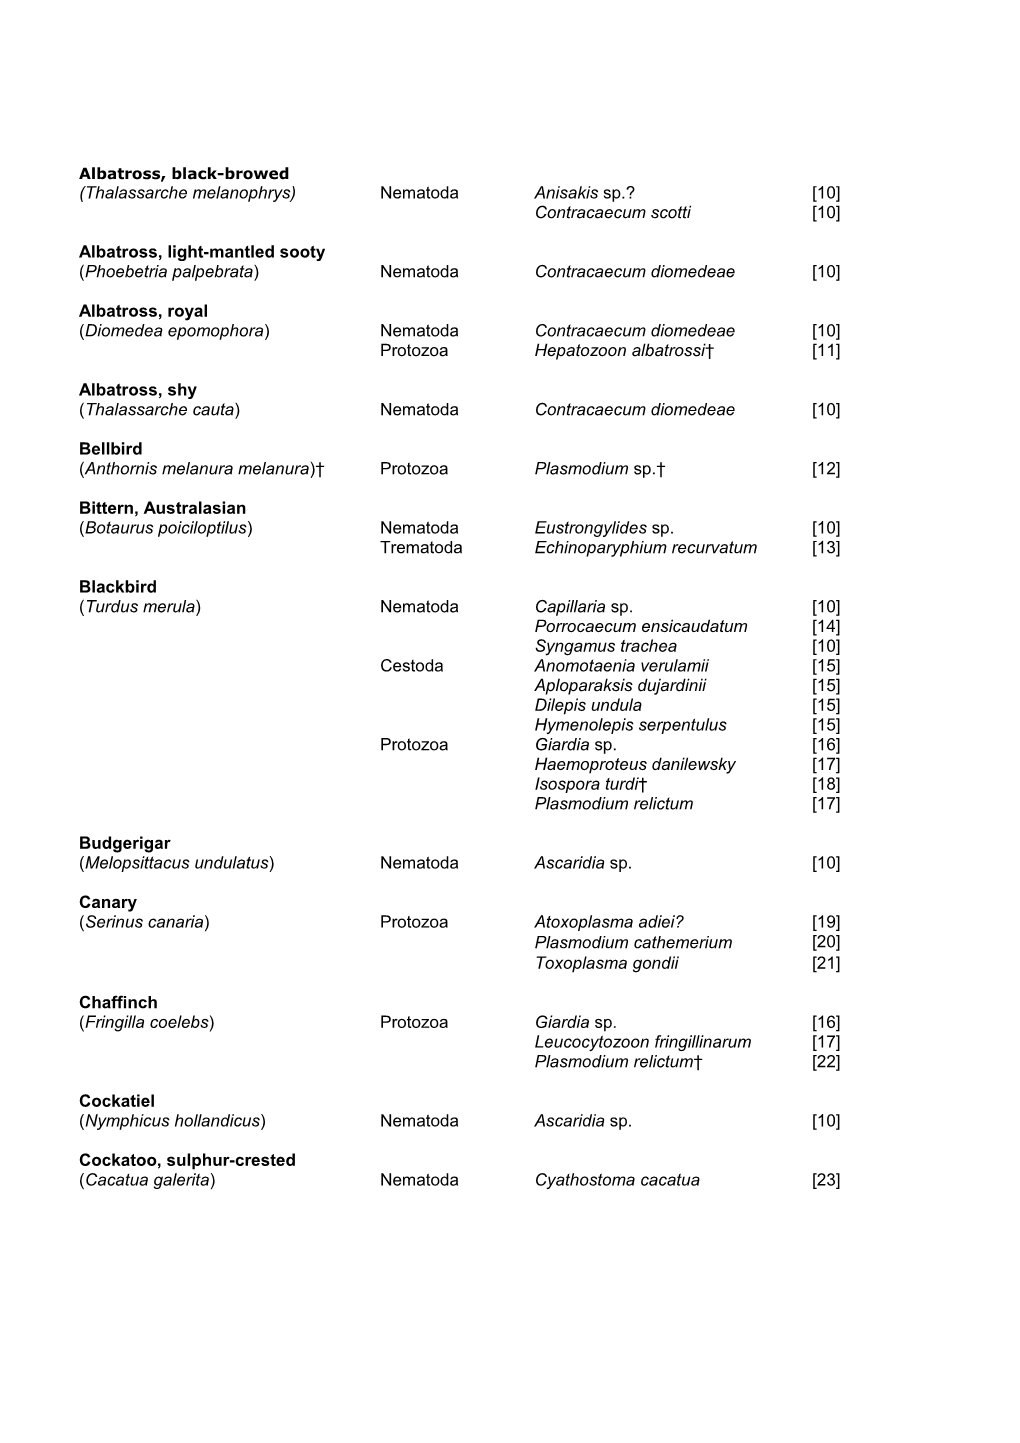 An Updated Checklist of Helminth and Protozoan Parasites of Birds in New Zealand